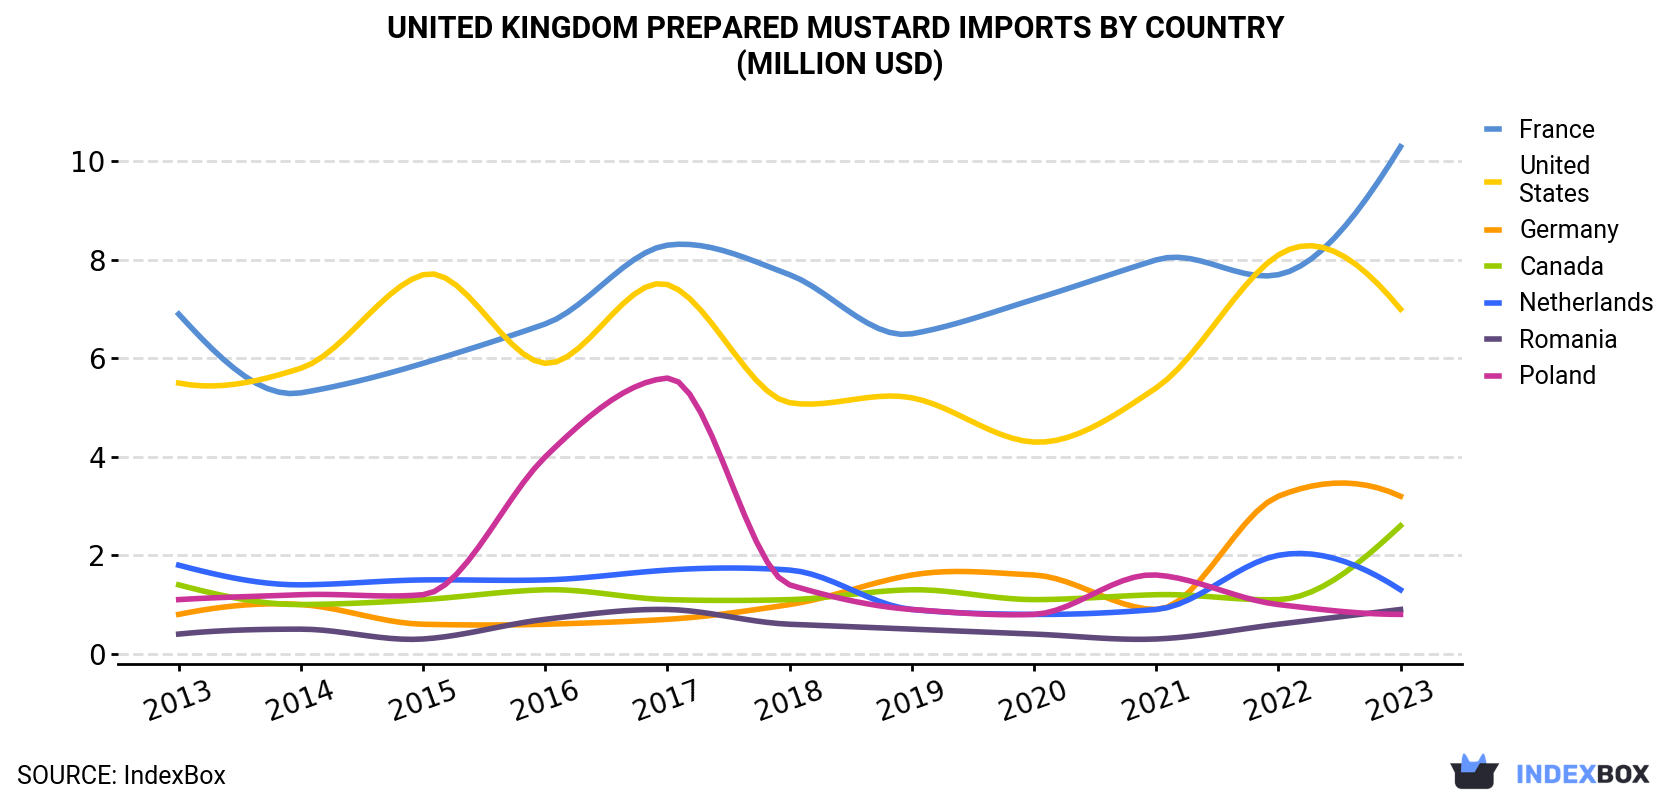 United Kingdom Prepared Mustard Imports By Country (Million USD)